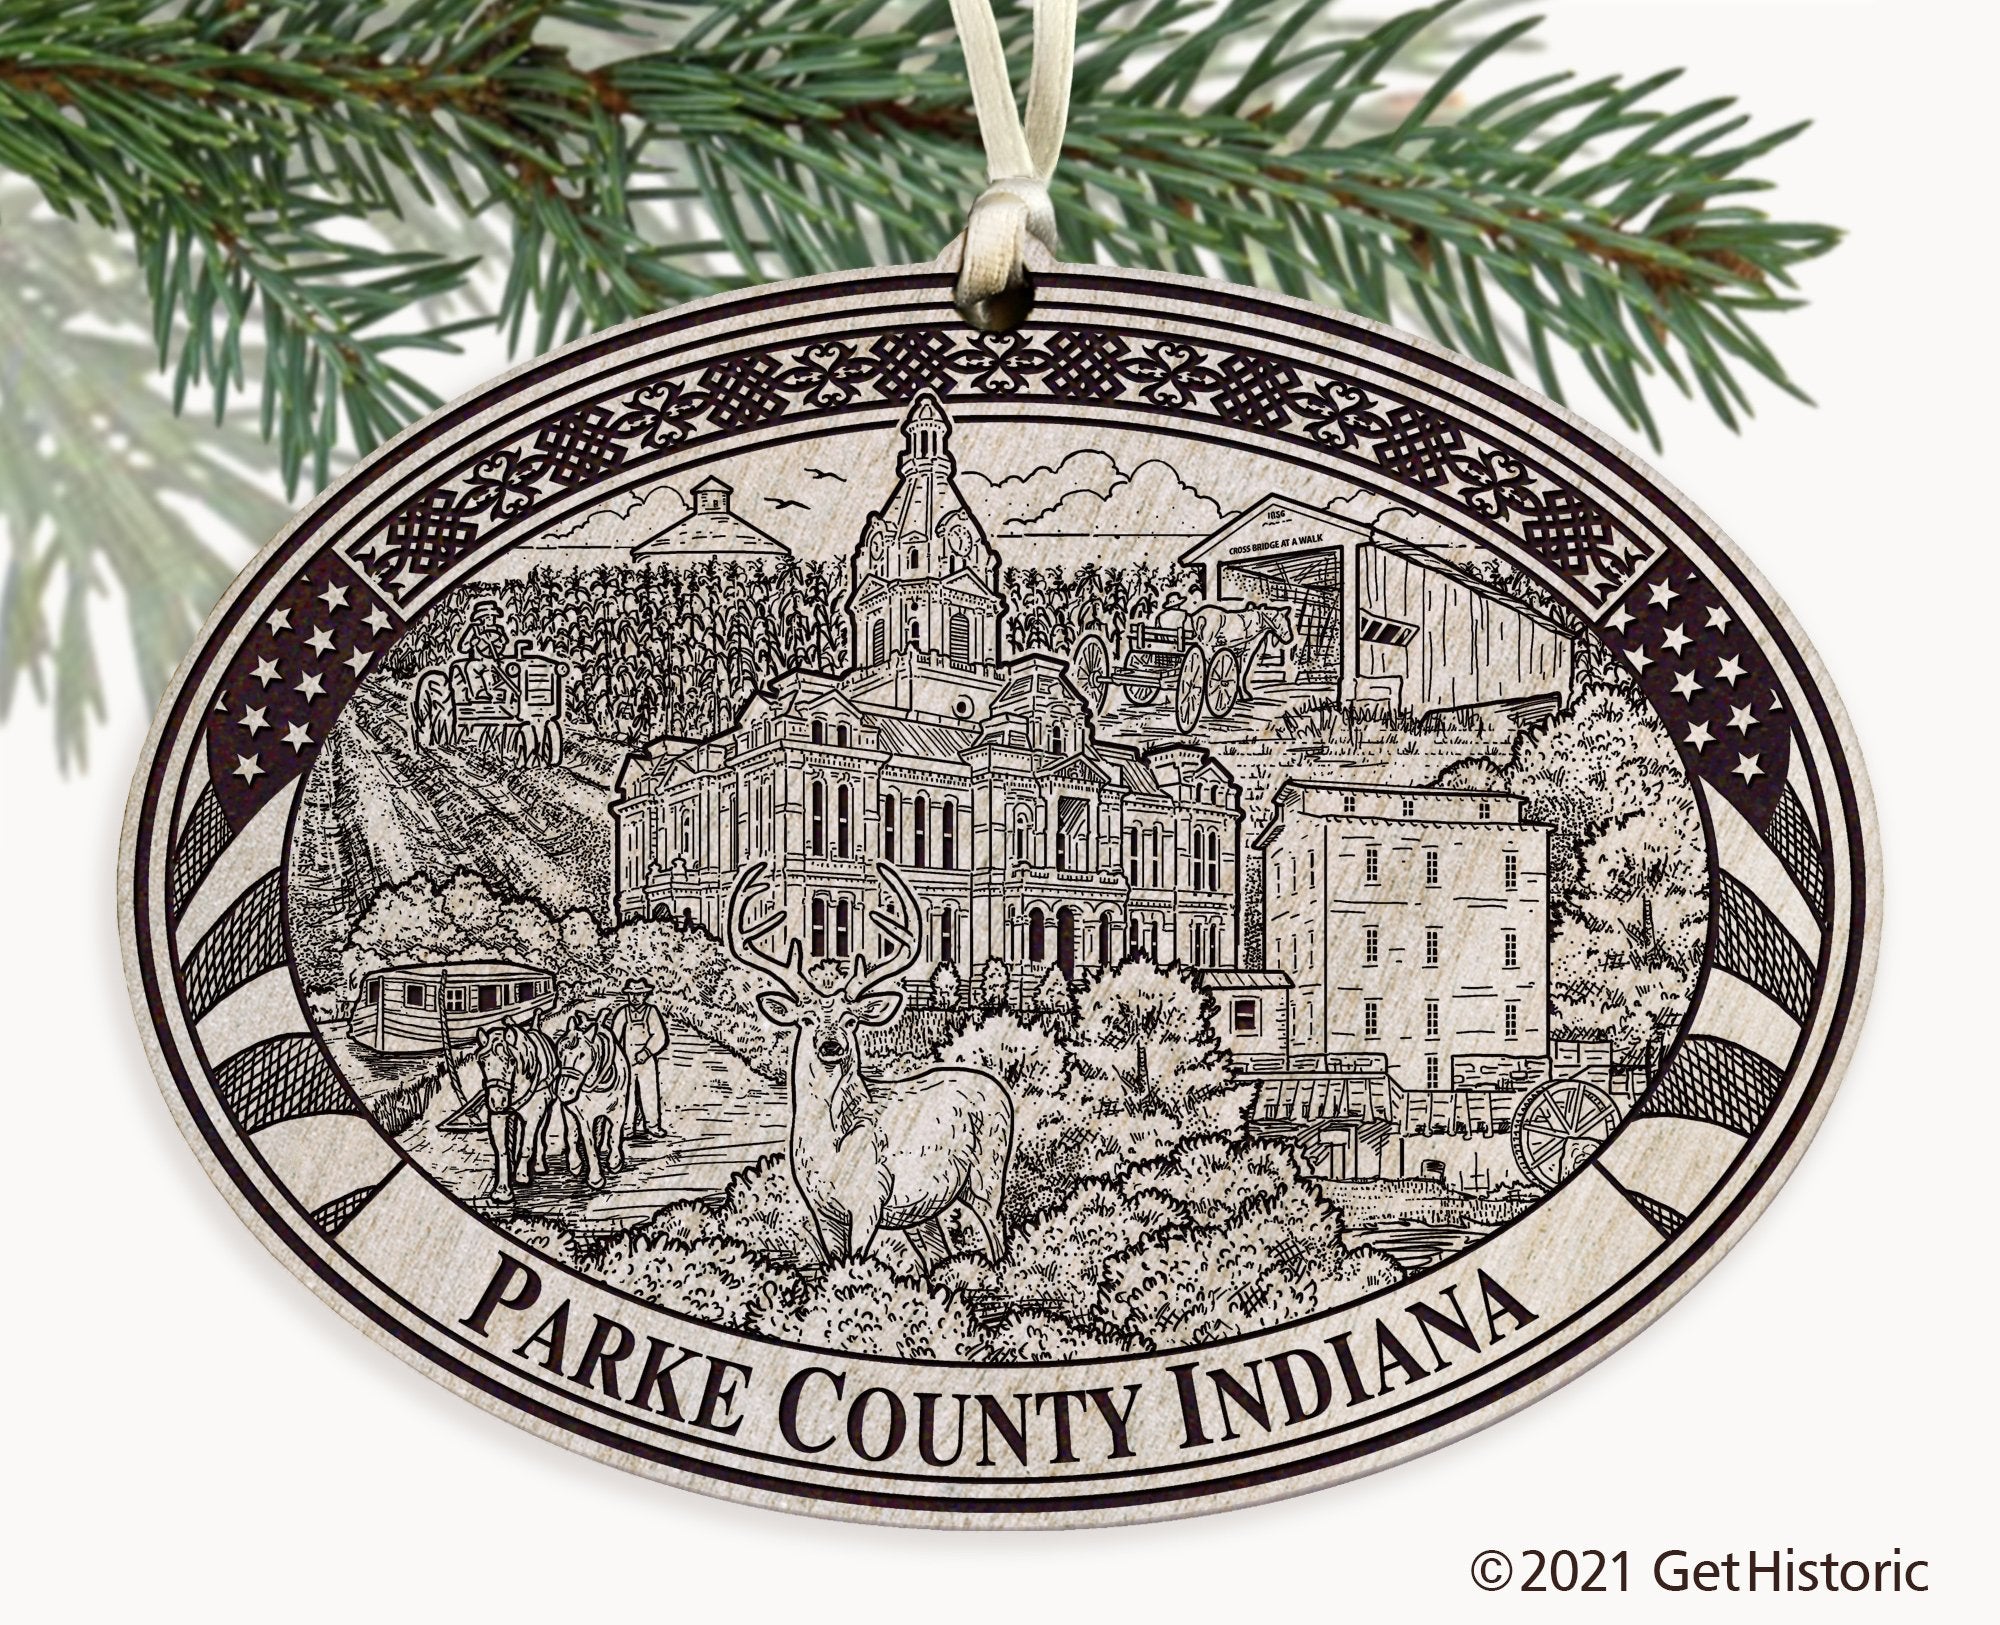 Parke County Indiana Engraved Ornament